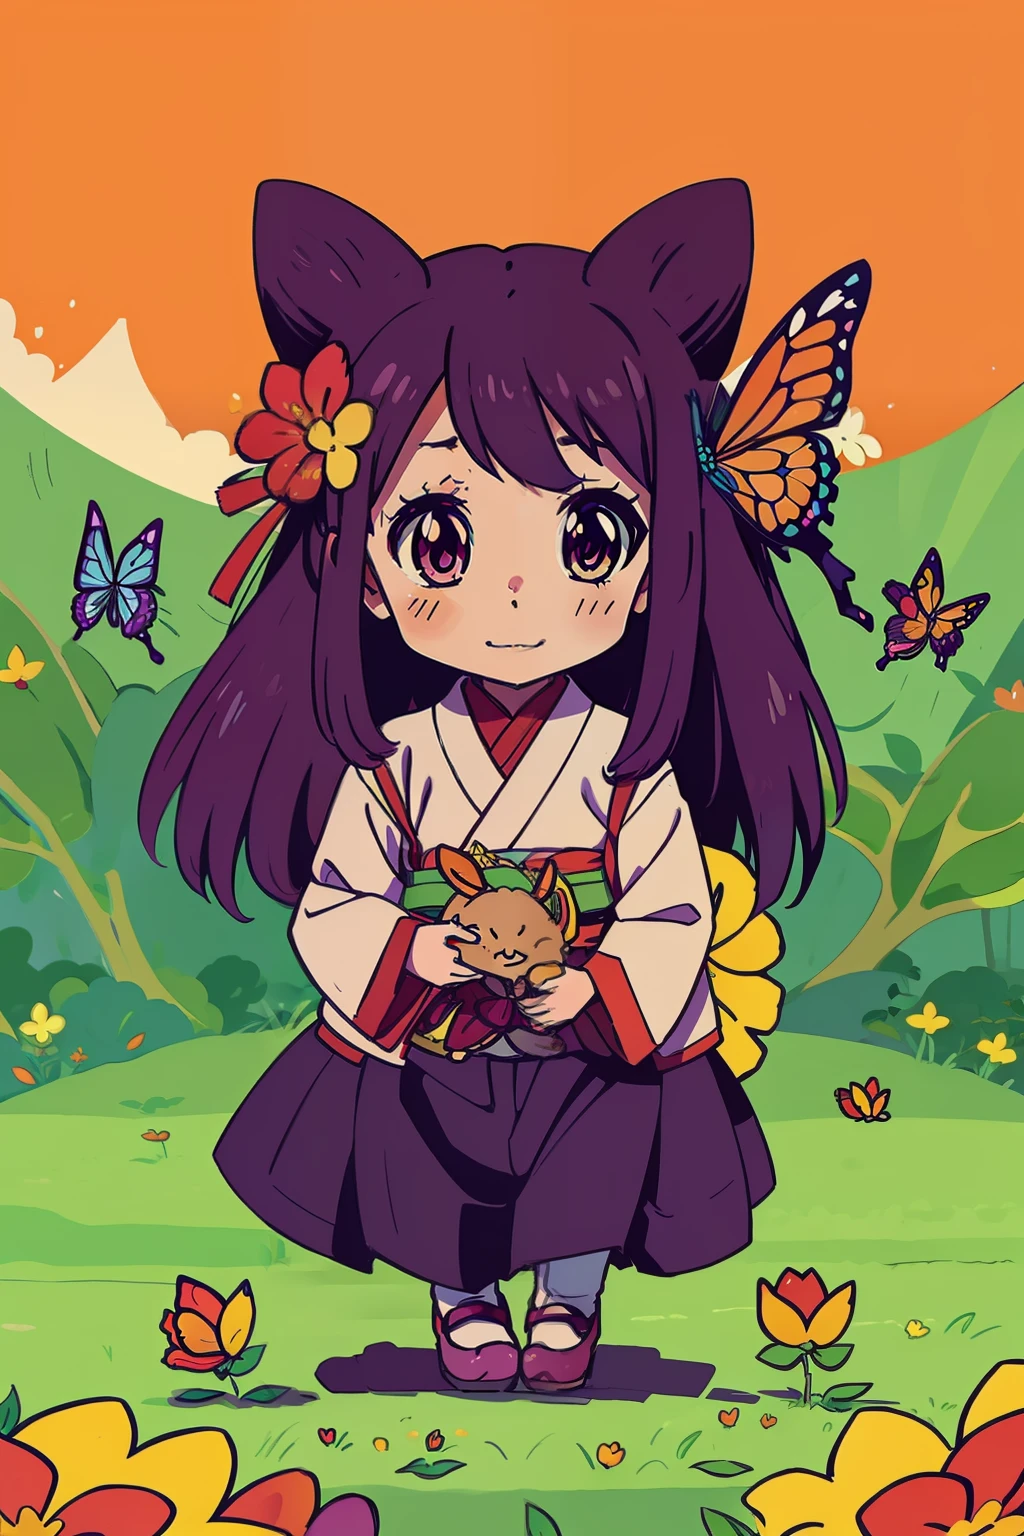  Reiko , happiness , inspiration from anime: A 5,000-year-old herbivorous dragon is being unjustly evil, forest , flower , butterfly fullcolor